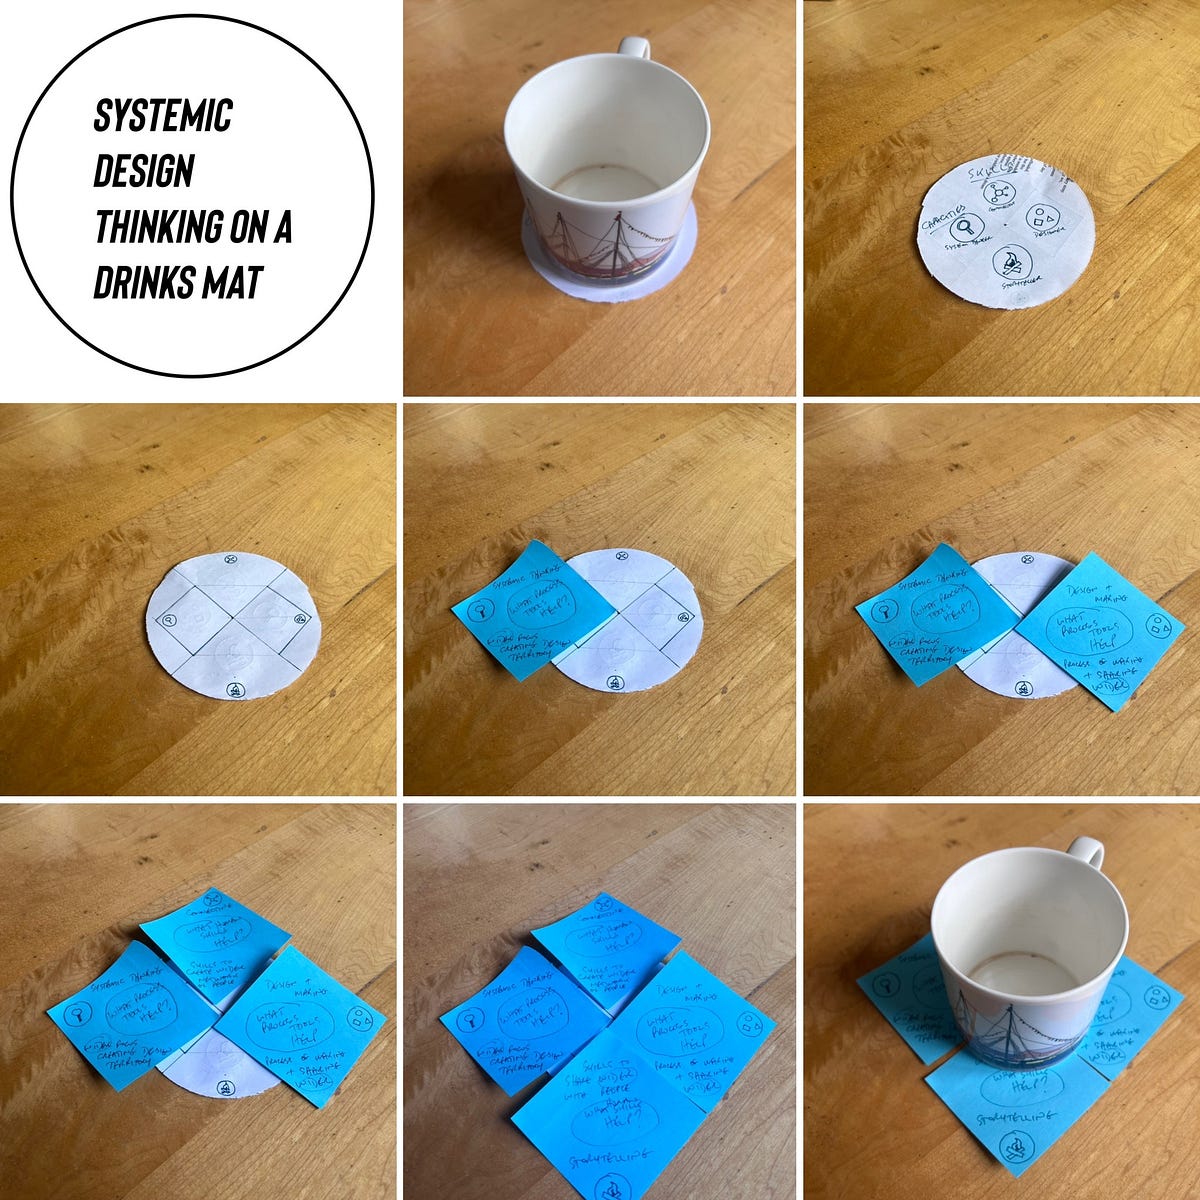 9 photos showing how a drinks mat can be used to build conversations and models